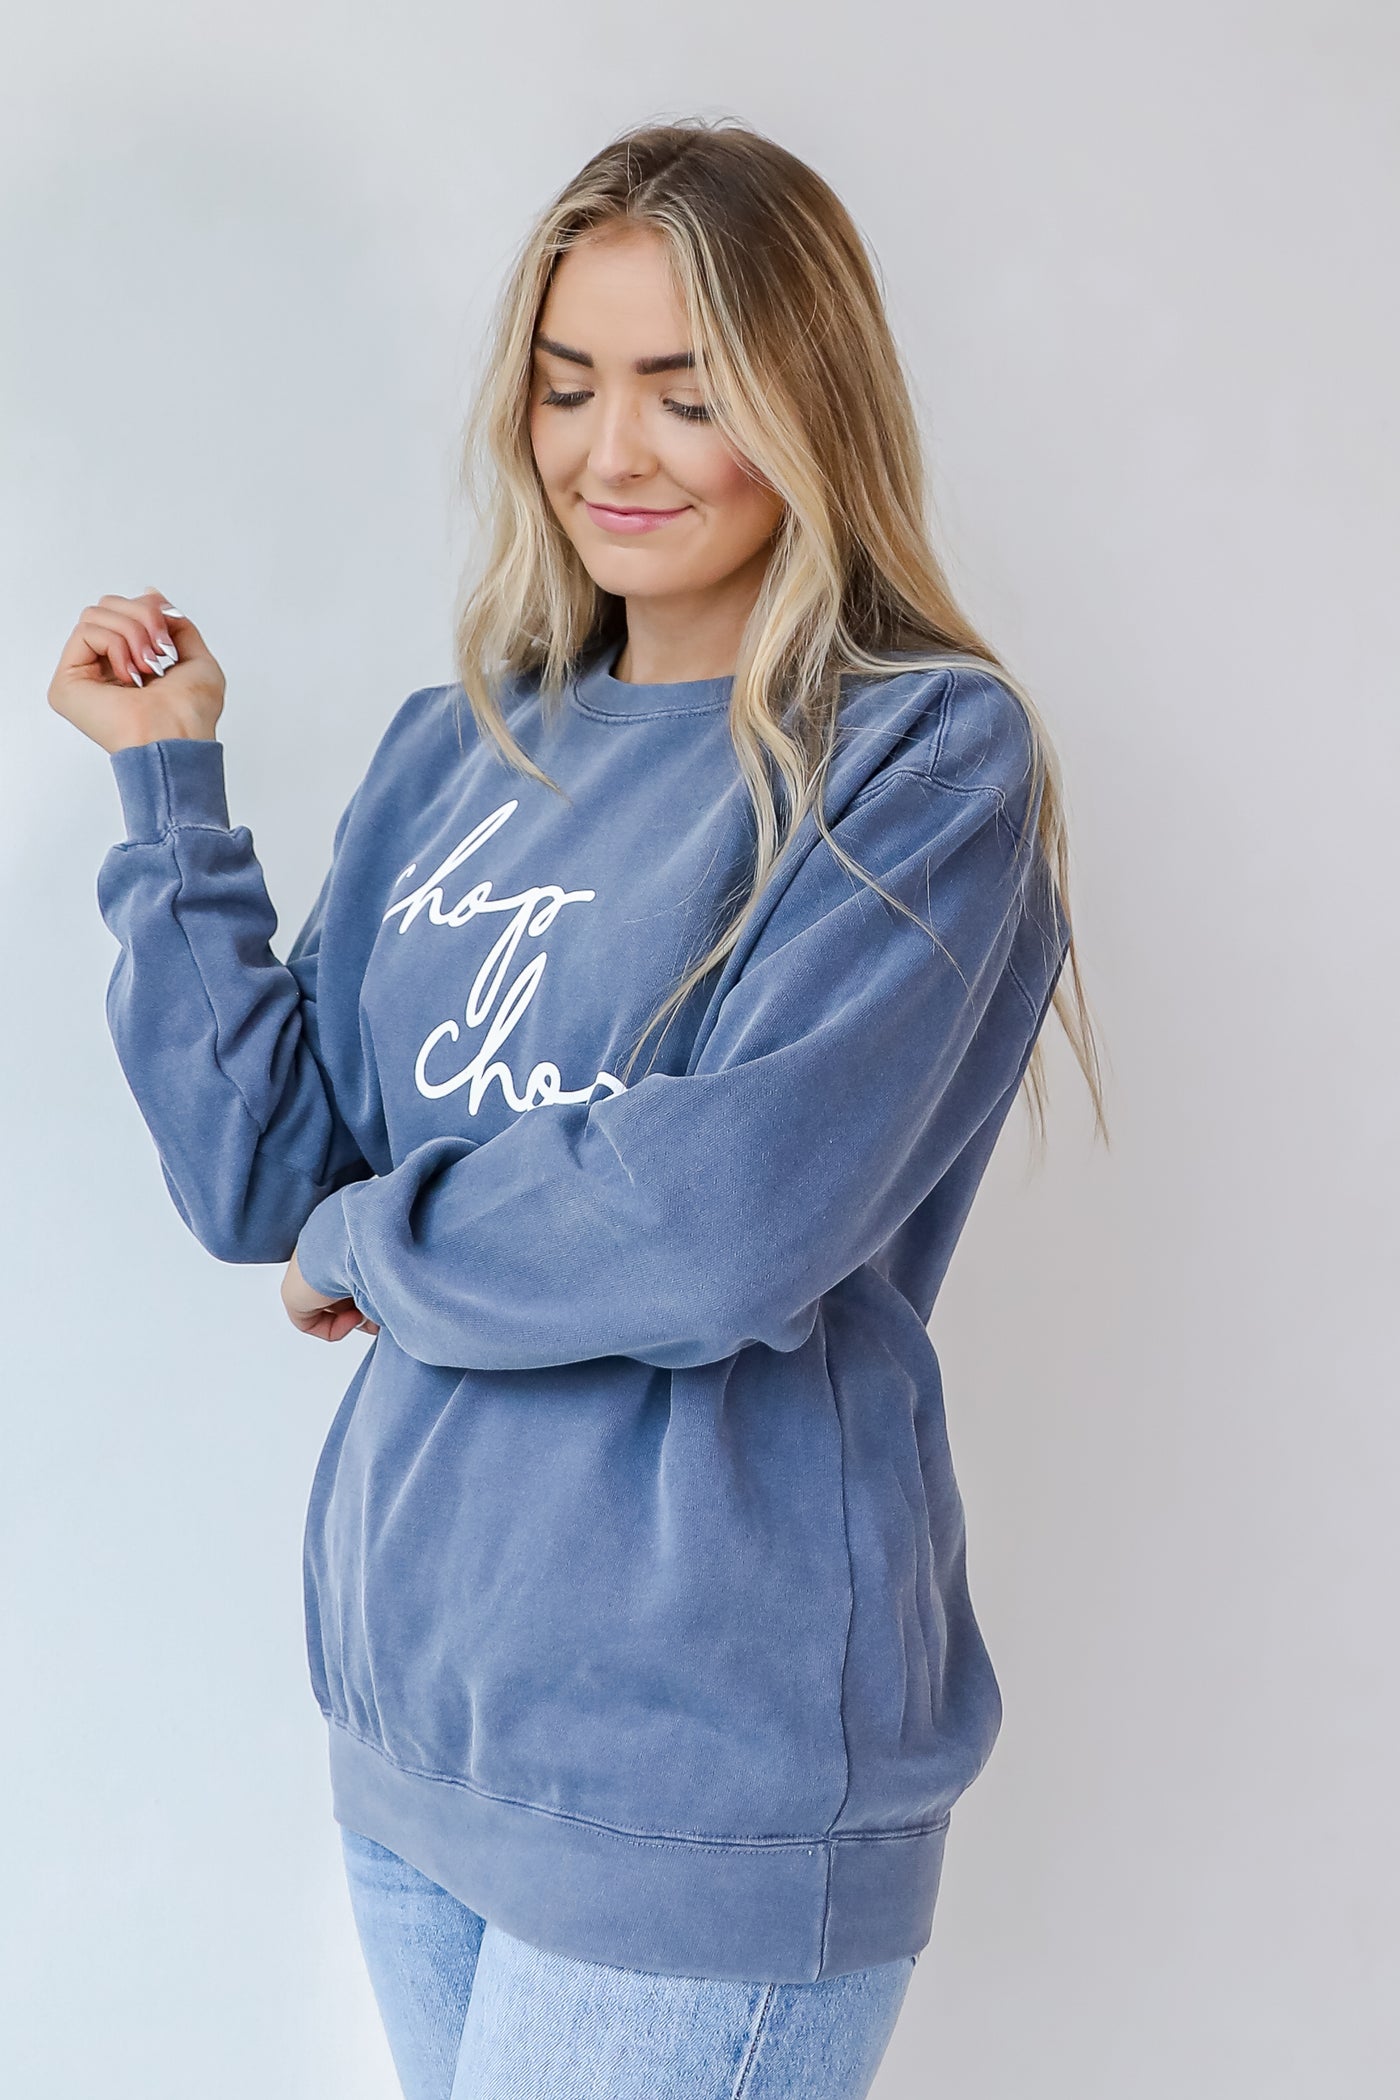 Chop Chop Script Pullover in navy side view